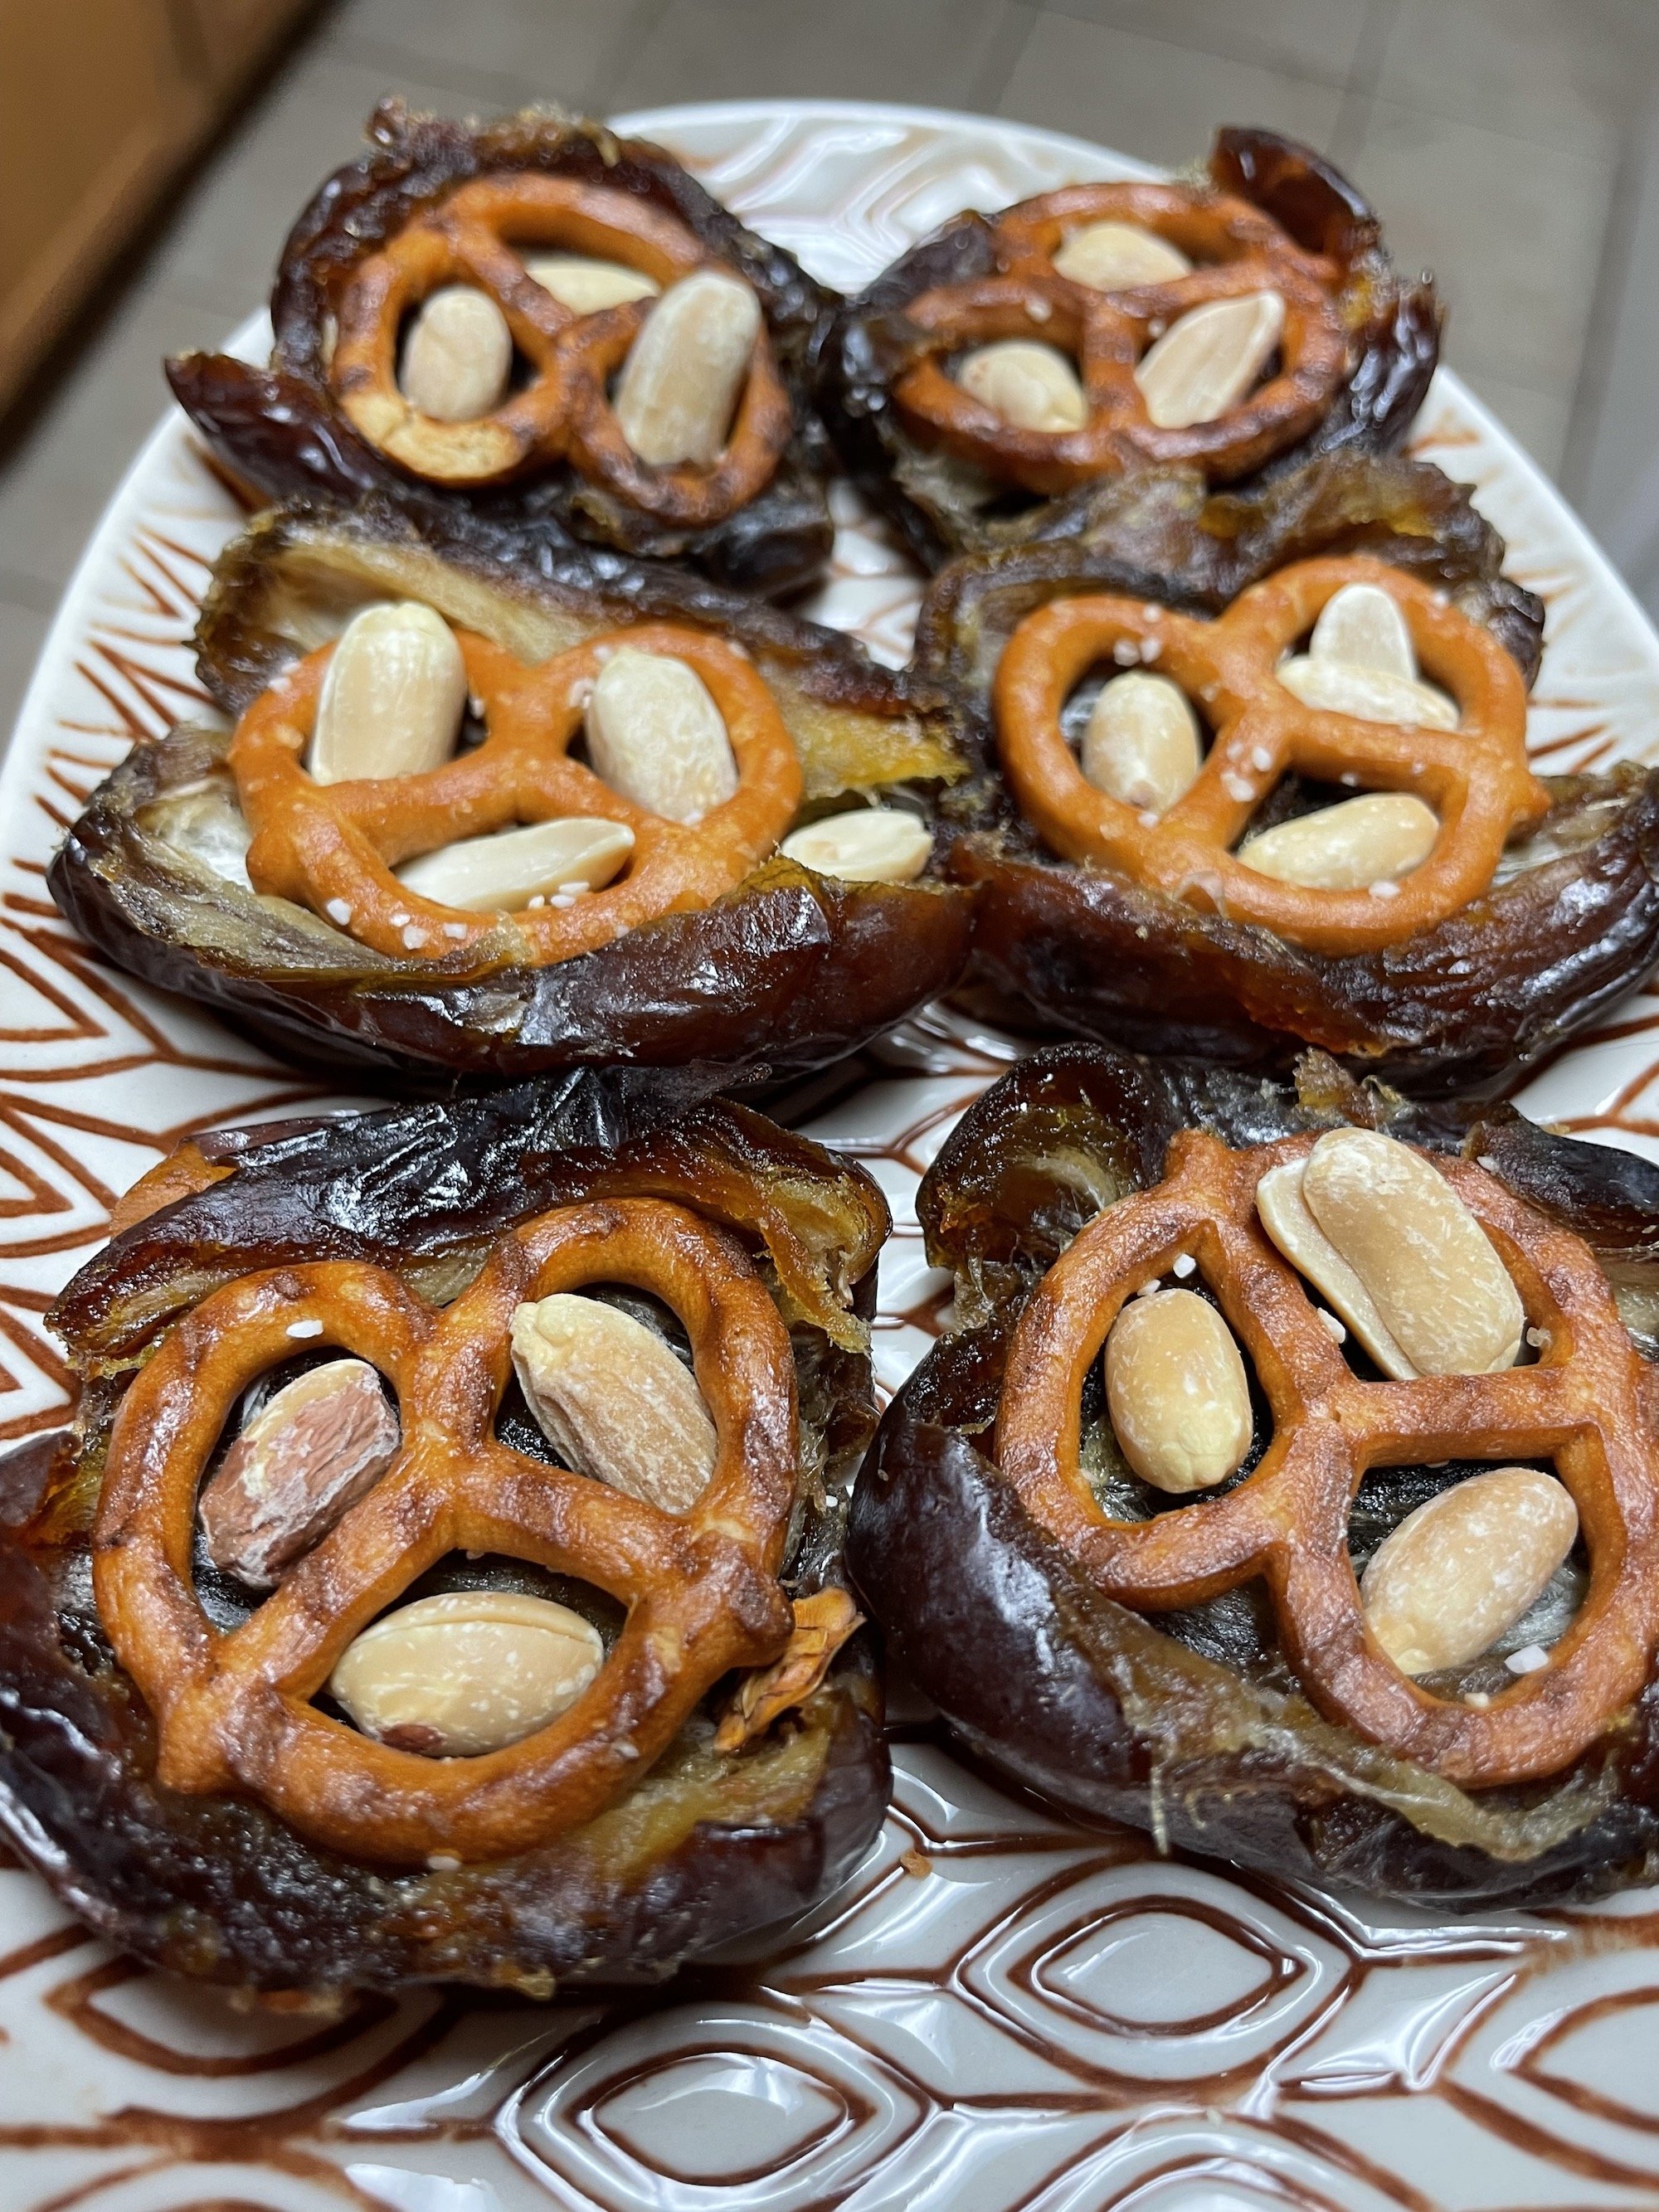 Take 5 Date Bars being assembled with pretzels and peanuts